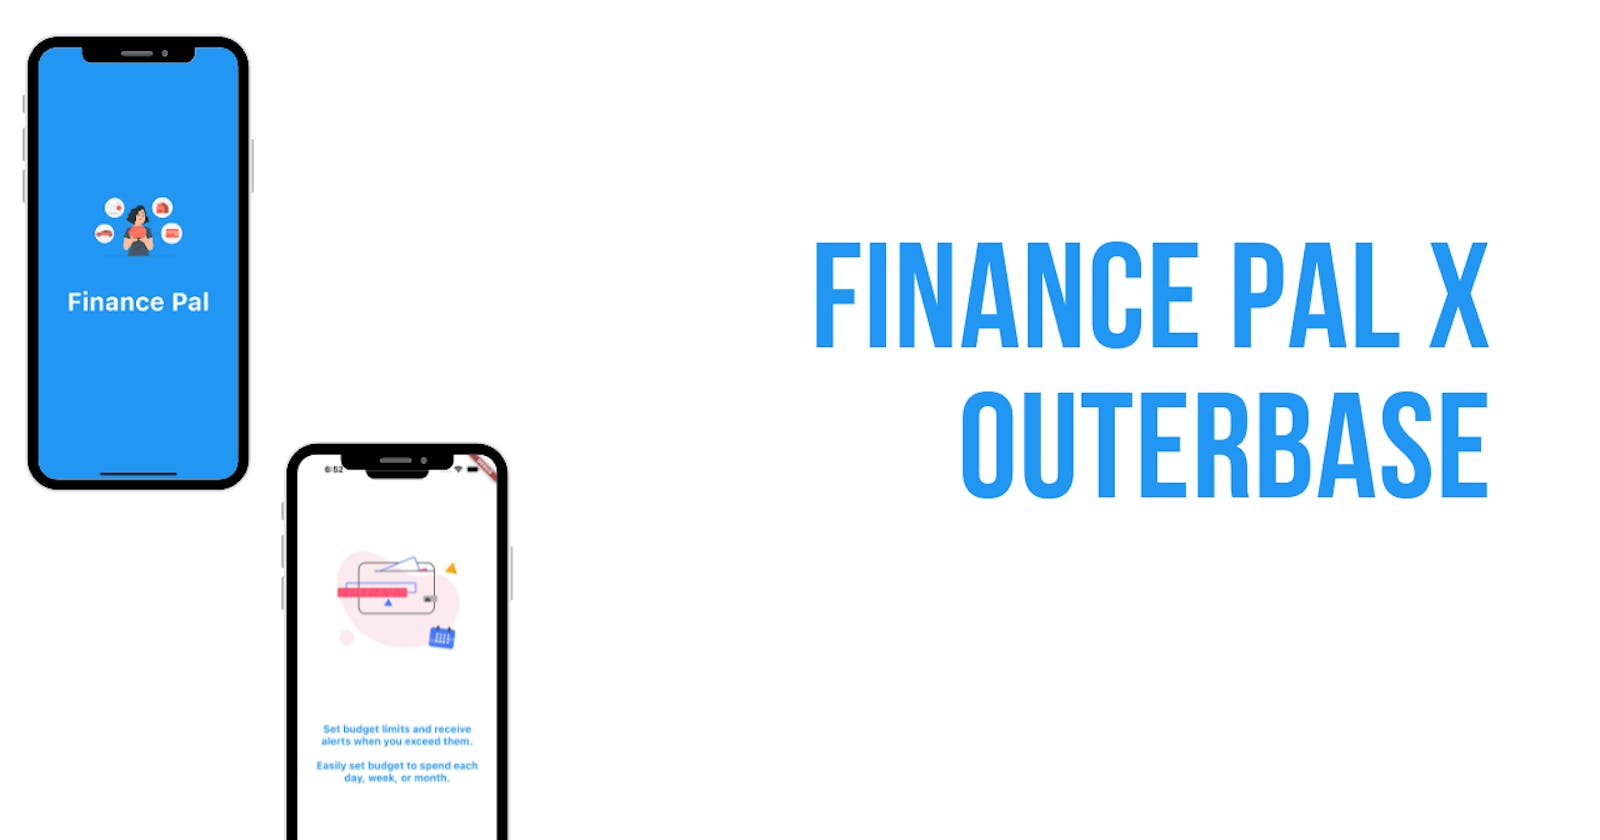 "Finance Pal: Your Ultimate Financial Companion - Managing Money Made Easy"